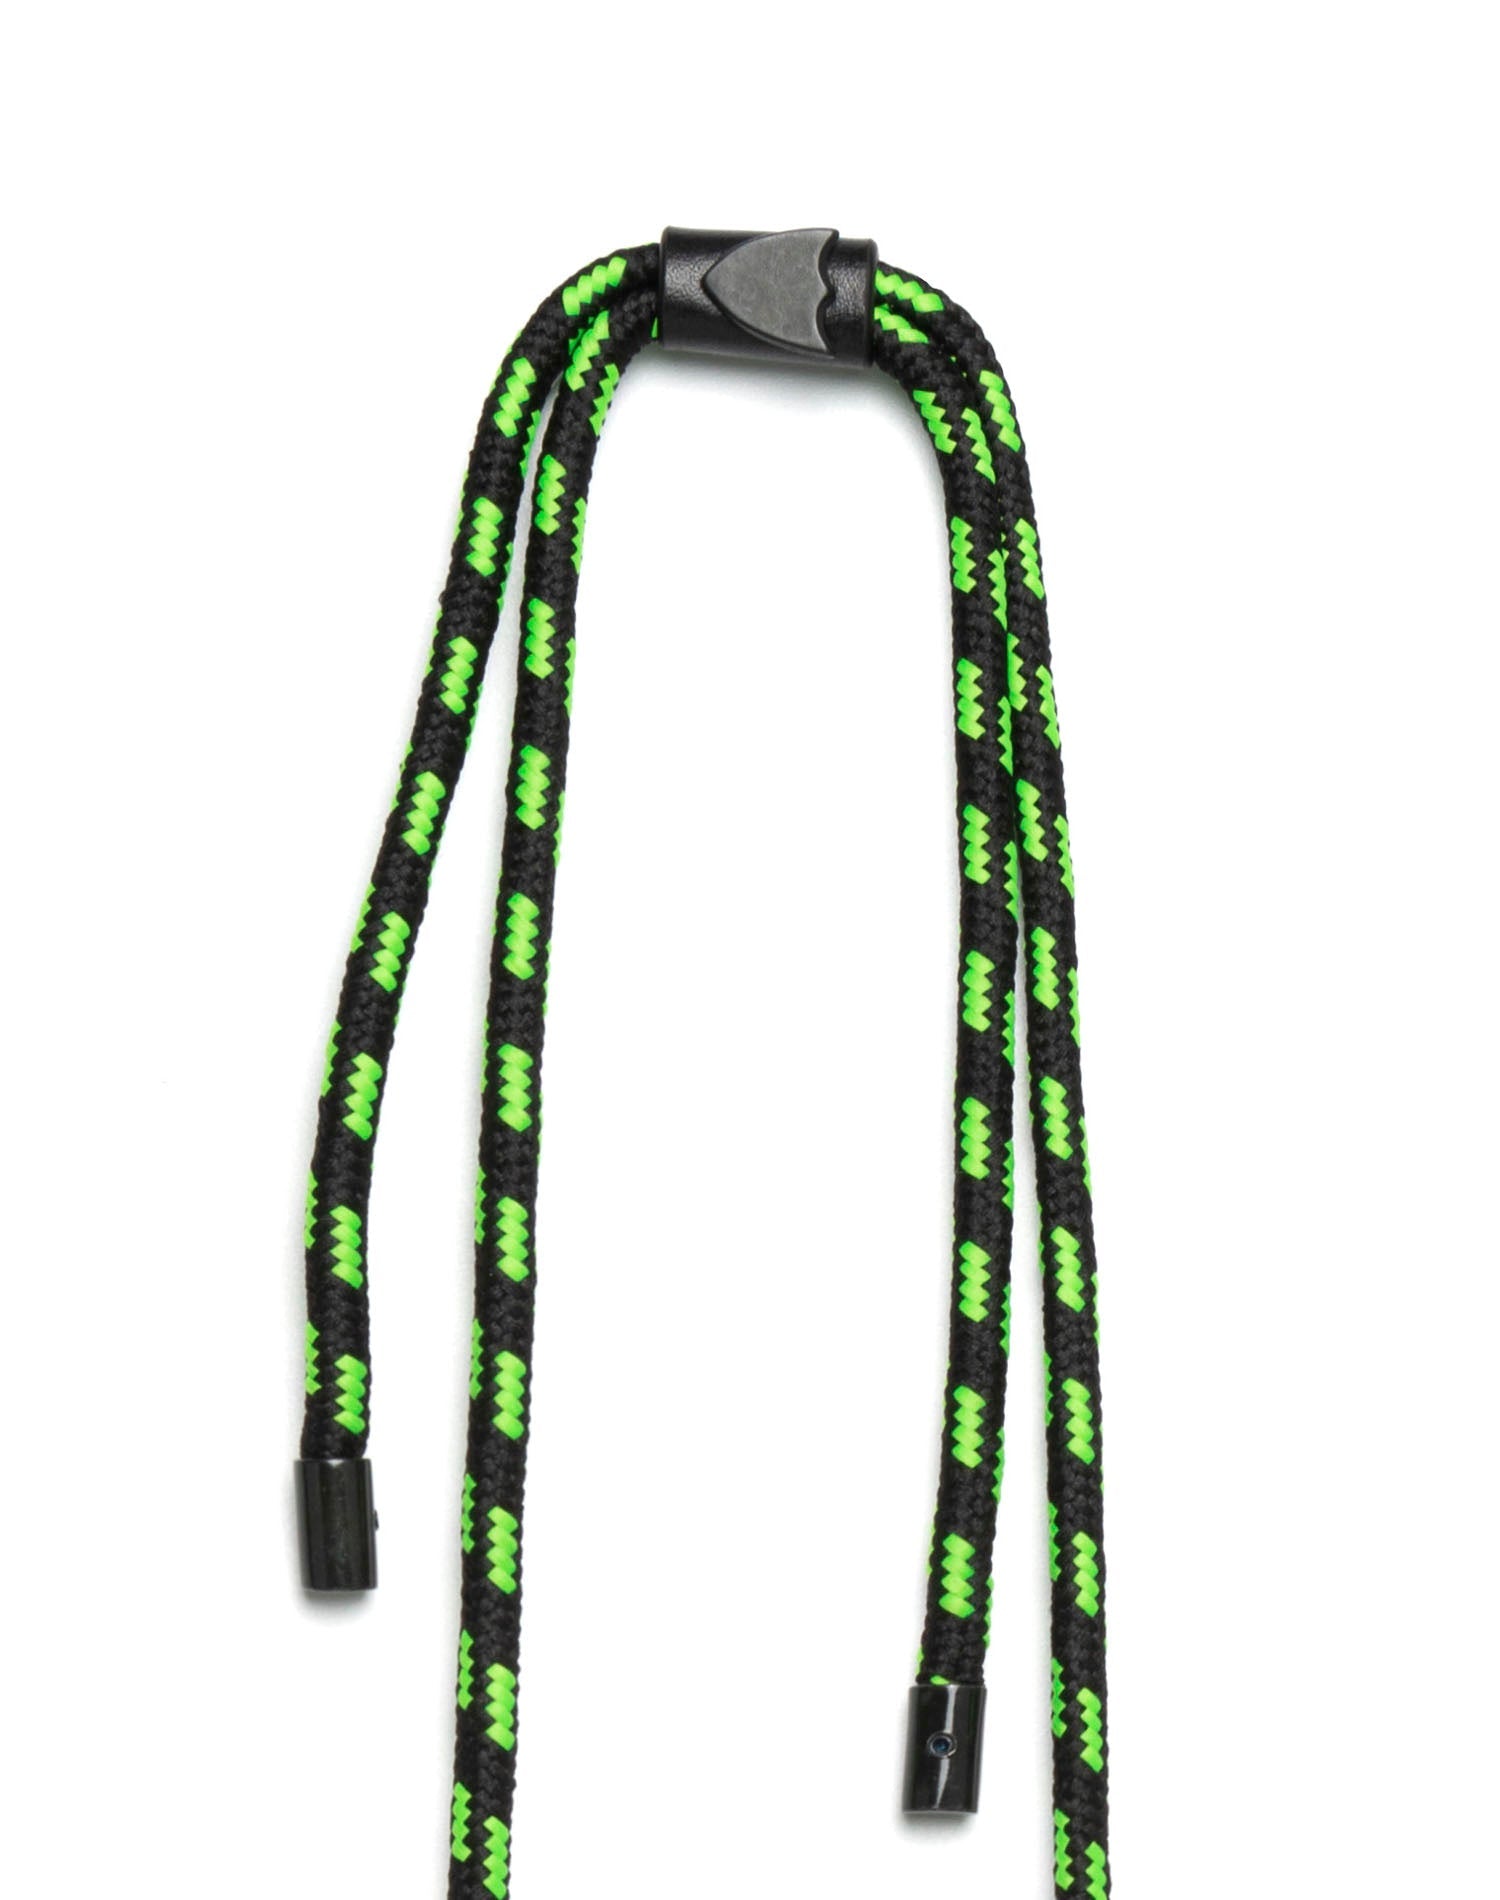 ROPE IPHONE HOLDER Iphone 11 case with technical rope neck strap and leather logo detail. Adjustable length. Black/Fluo Green colour. HTC LOS ANGELES